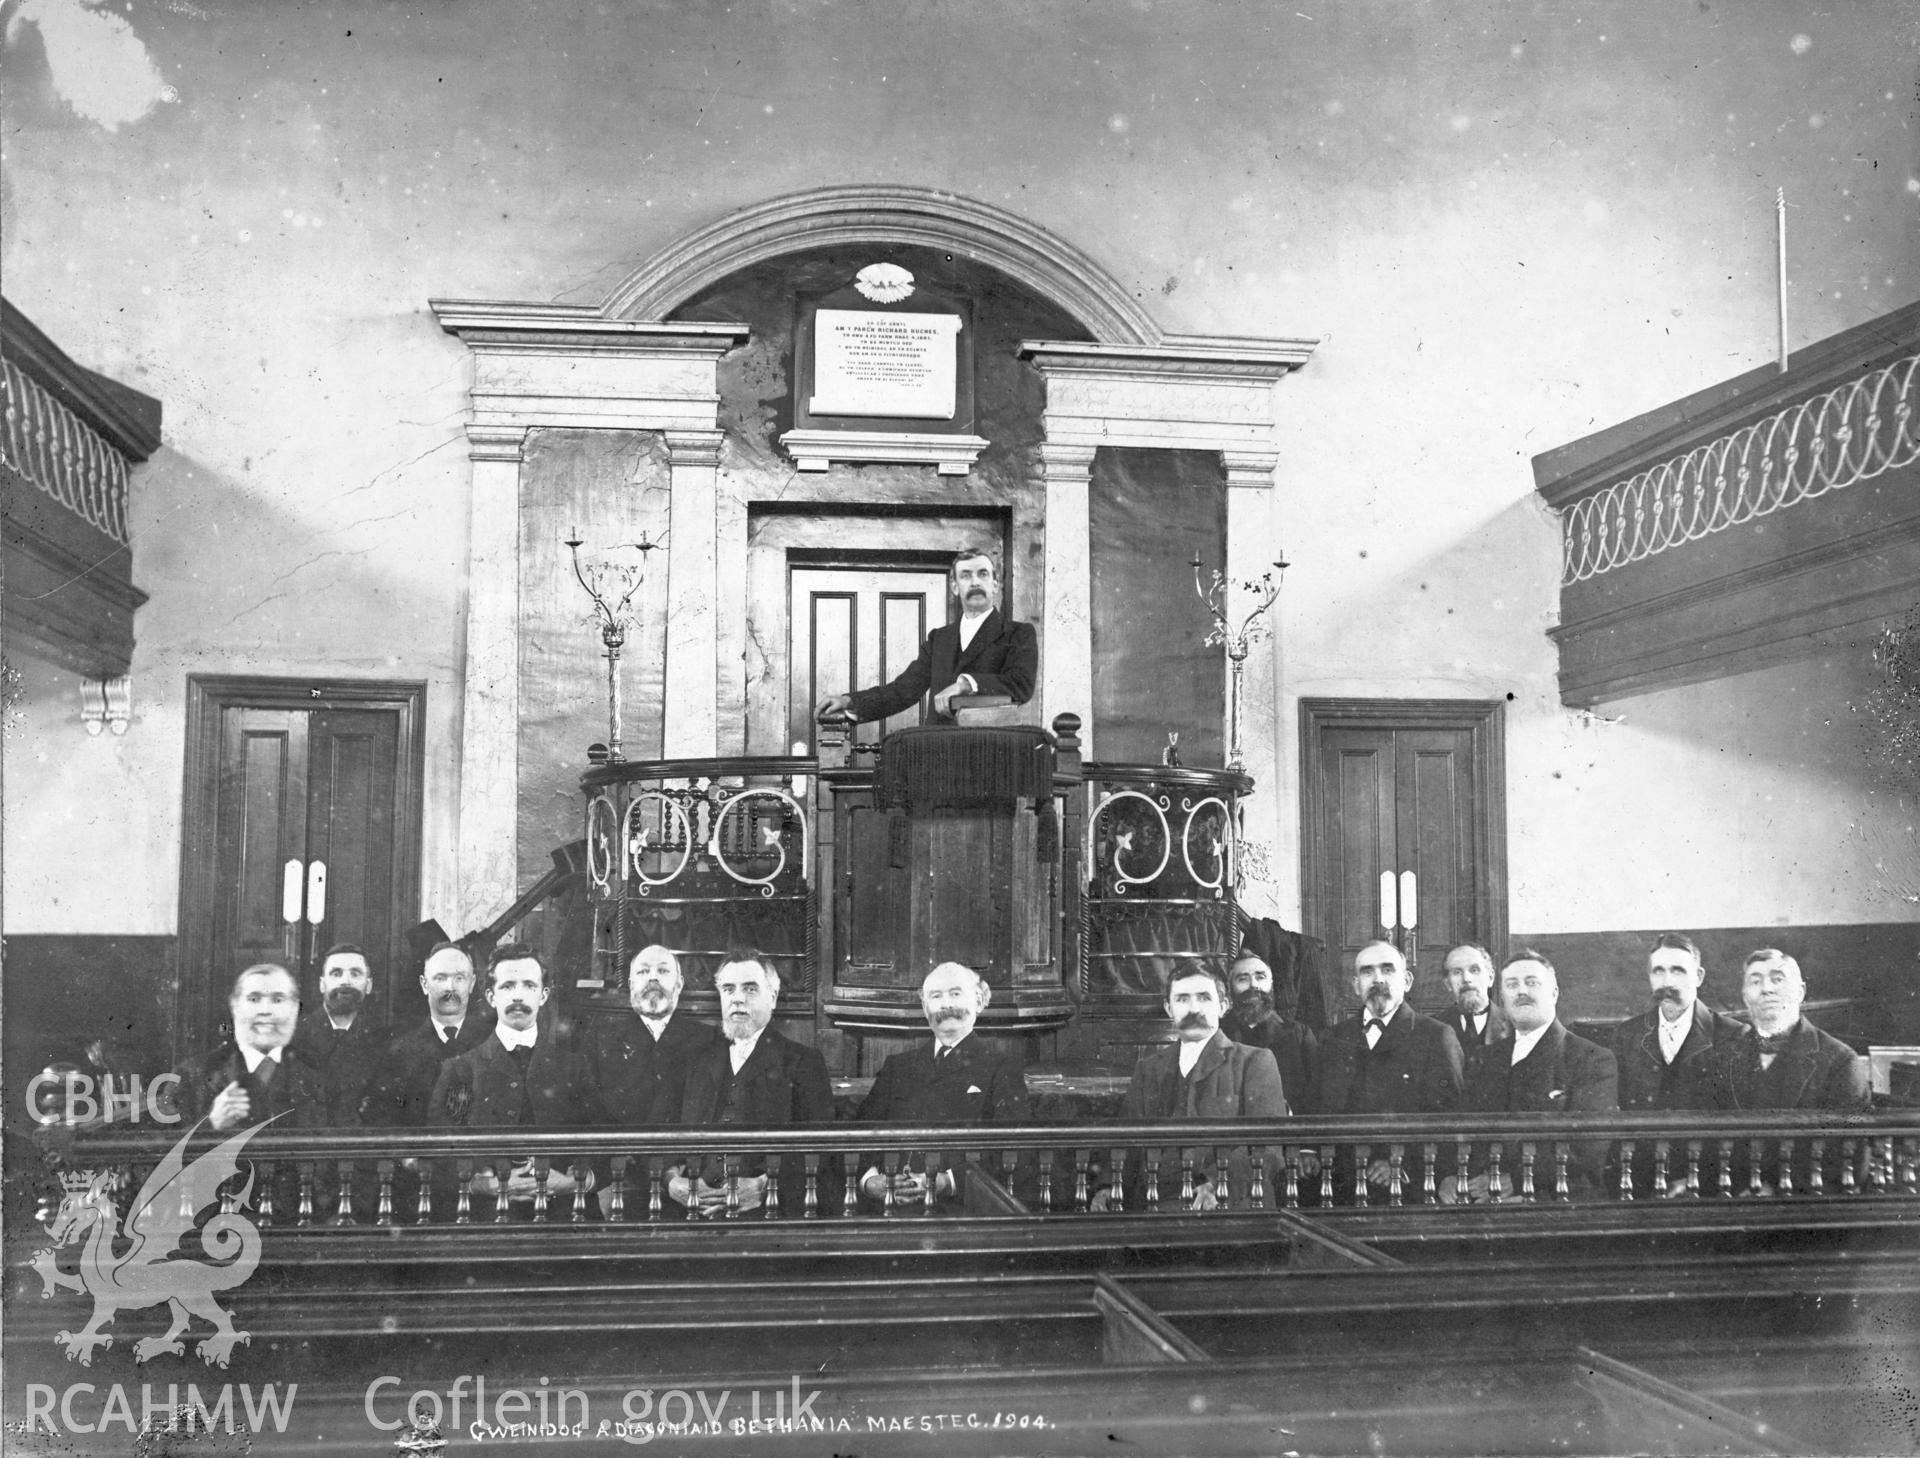 Digitized copy of a black and white photograph showing an interior view of Bethania Chapel, Maesteg, with  the minister and deacons. Part of a collection of material relating to Bethania Chapel, Maesteg, loaned for copying by the Welsh Religious Buildings Trust. The original collection is held by the Glamorgan Record Office.